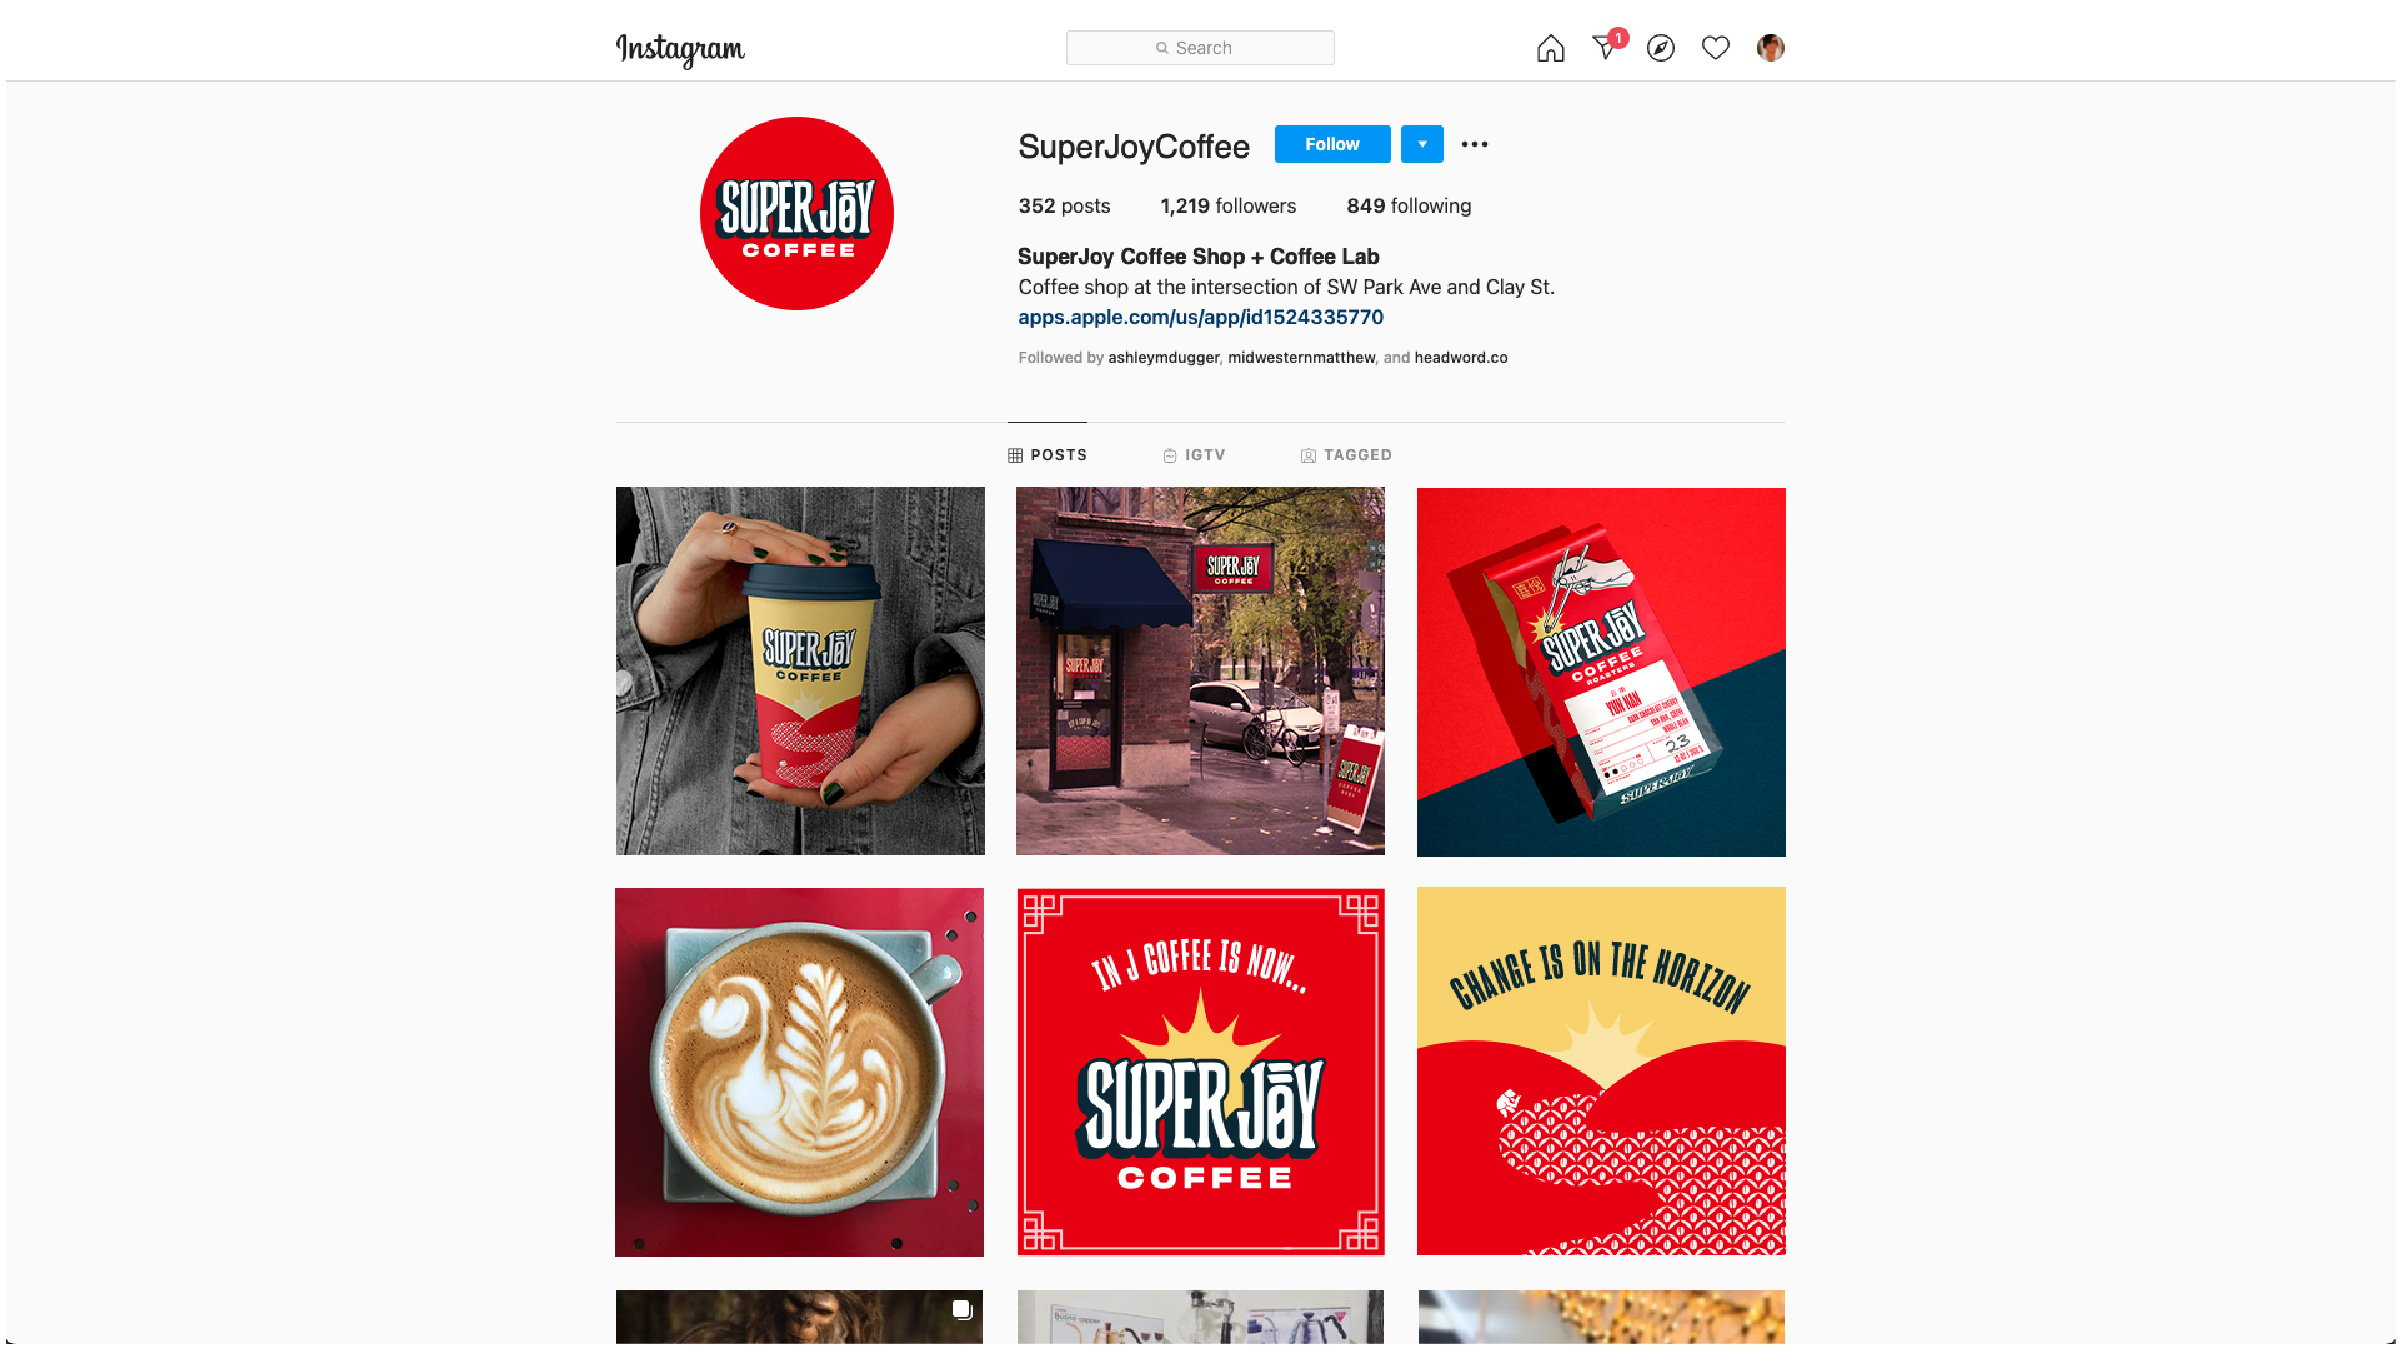 A look at the Super Joy Instagram feed shows a series of branded images. They reflect how brand identity comes to life in social media.